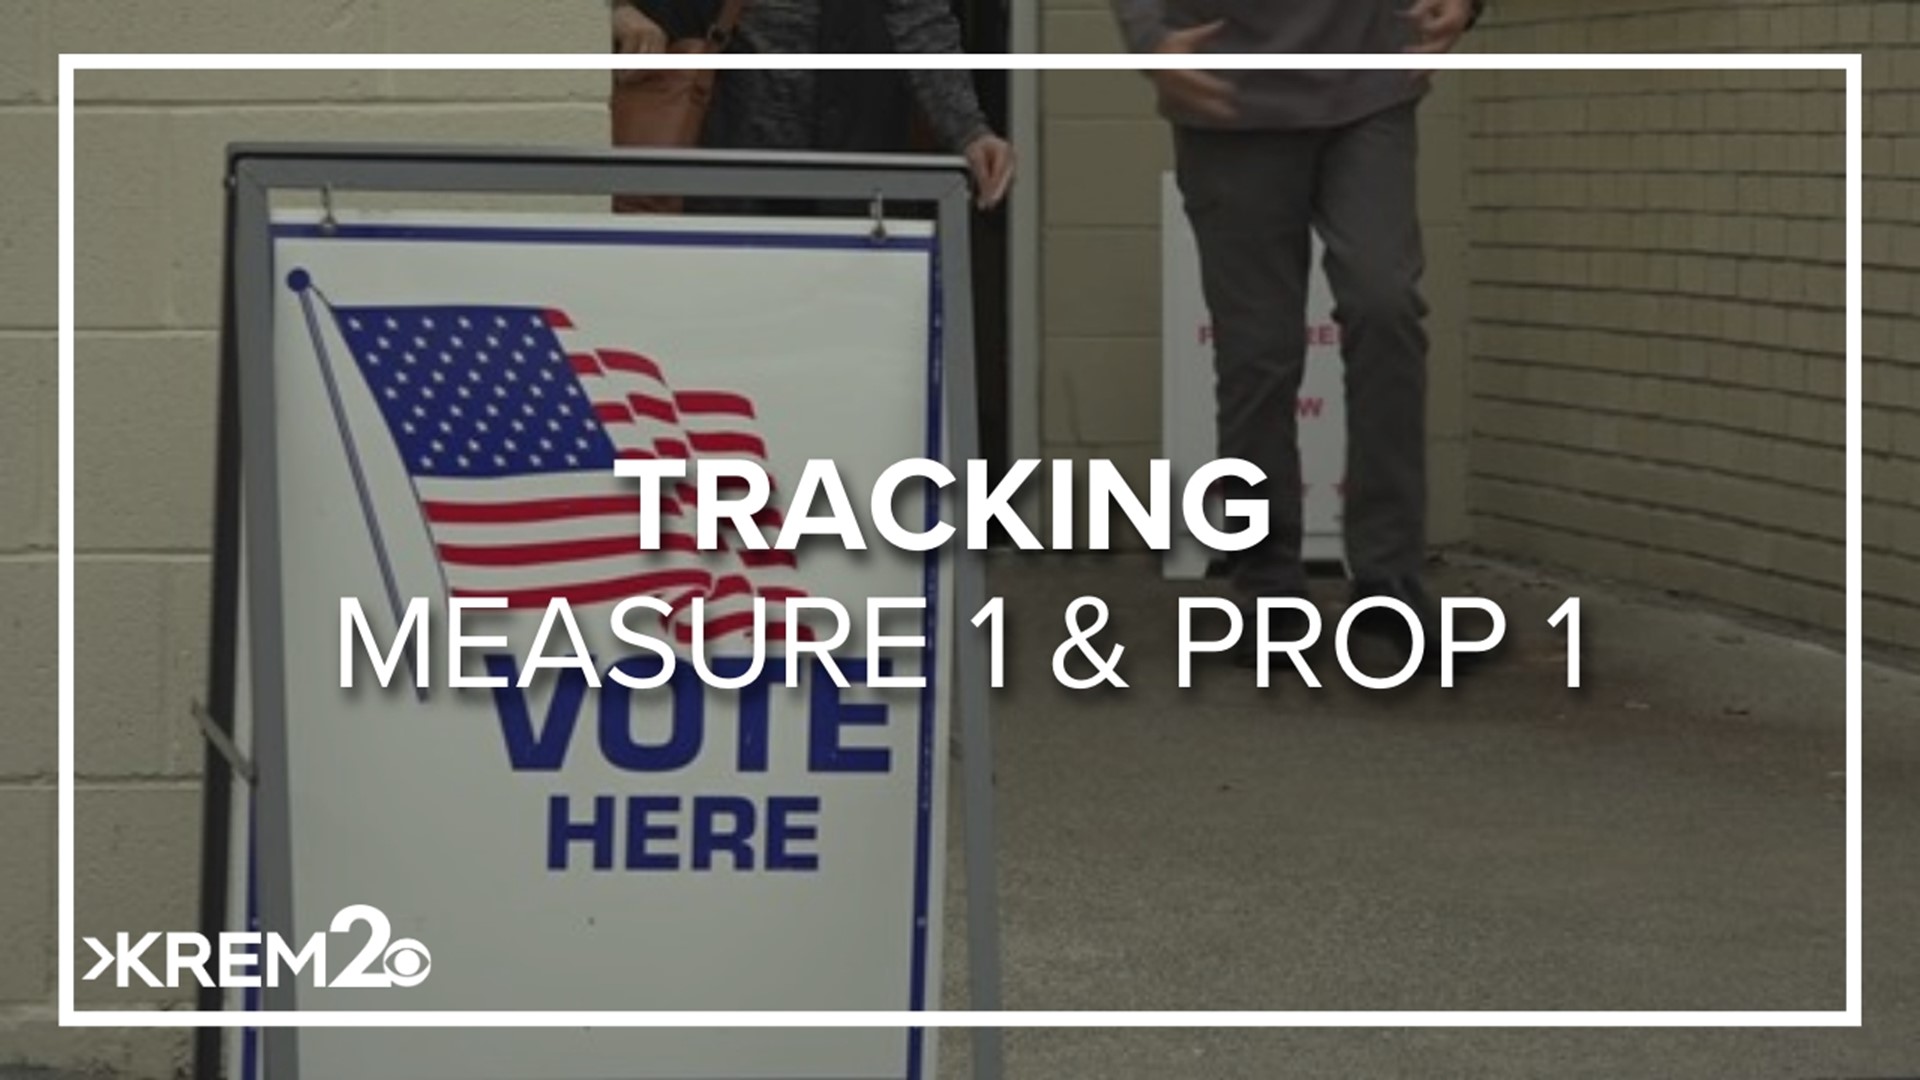 As of 6 a.m. on Nov. 8, Measure 1 is failing by over 20,000 votes while Proposition 1 is leading by over 20,000 votes.